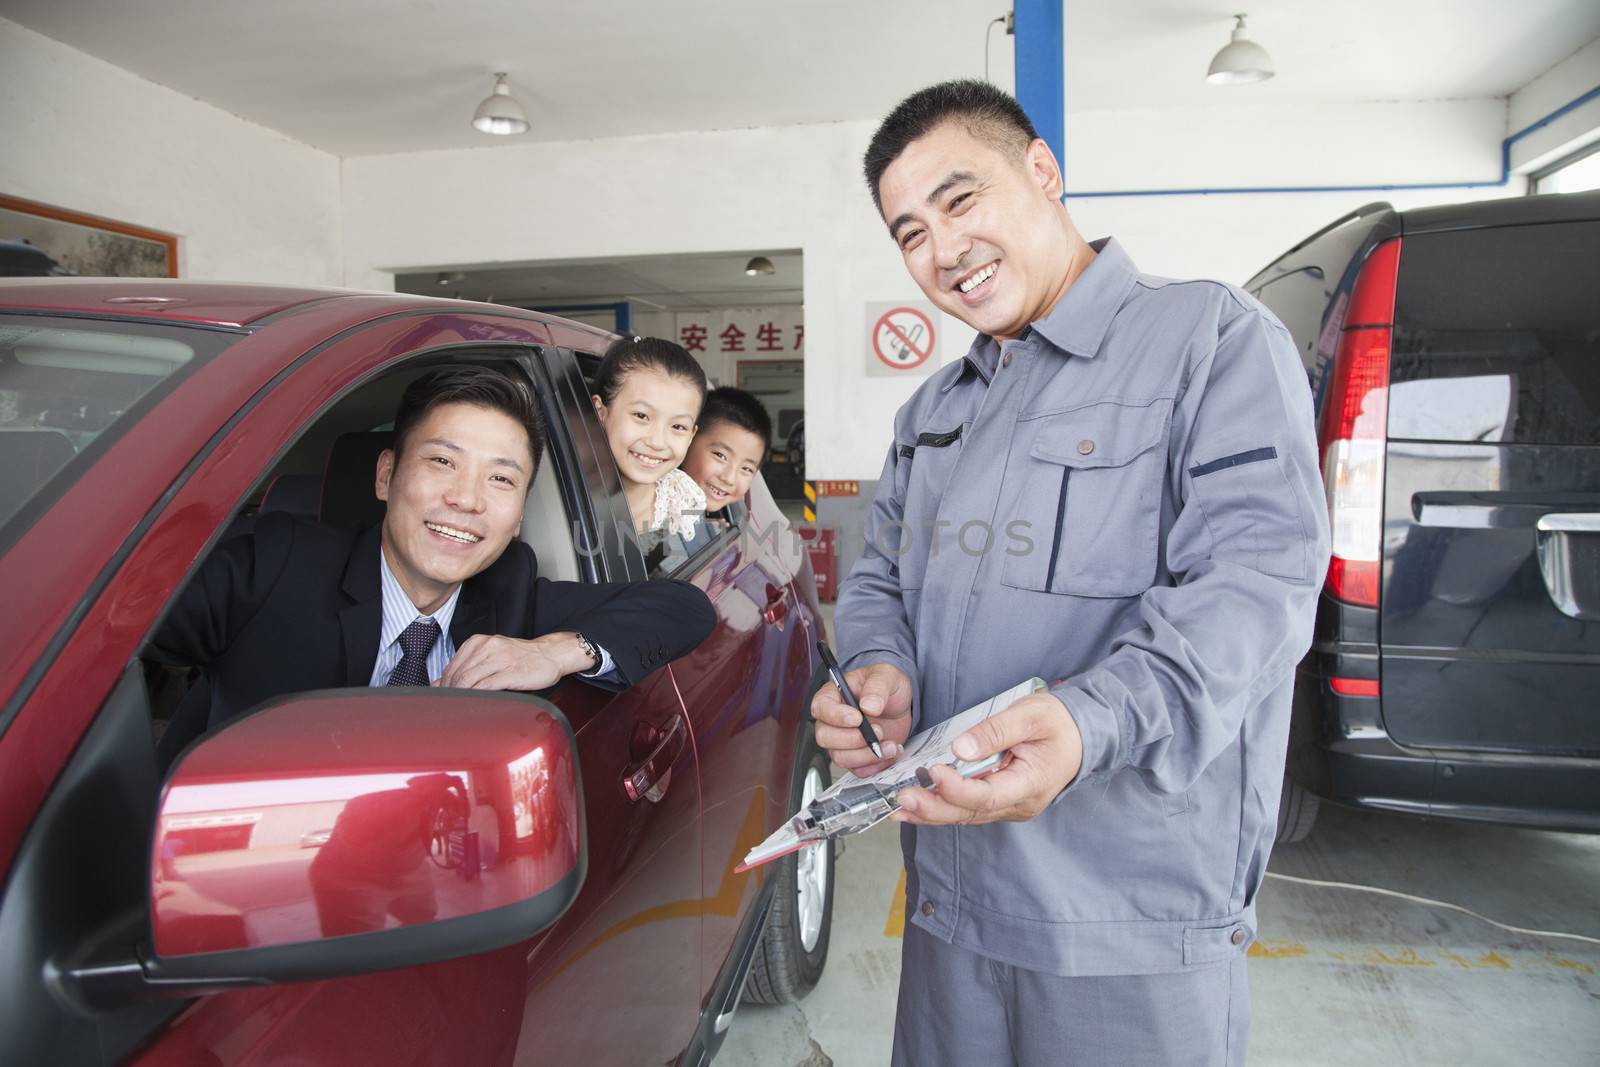 Mechanic Helping Family with Their Car by XiXinXing